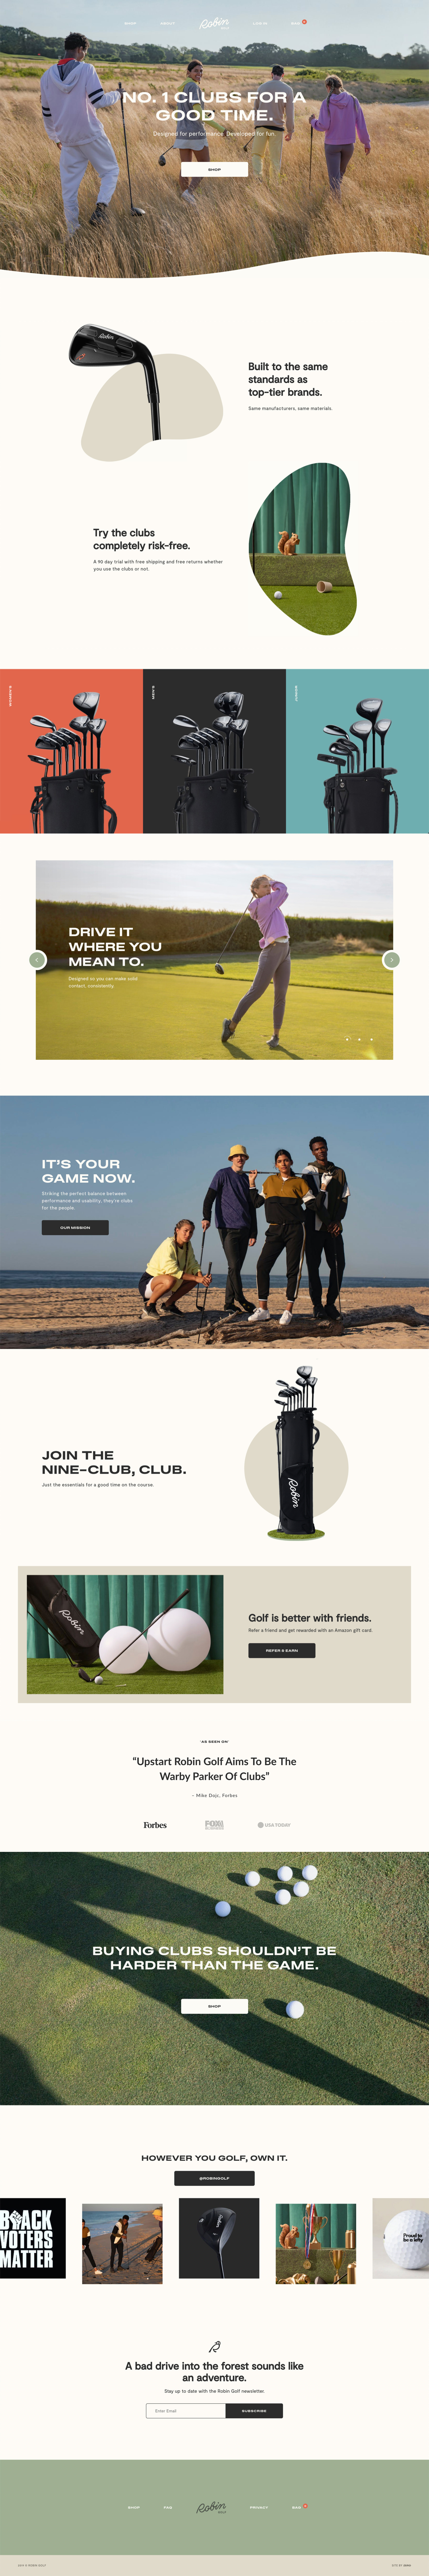 several promotional pages of the Robin Golf golf club, several people posing on the golf course